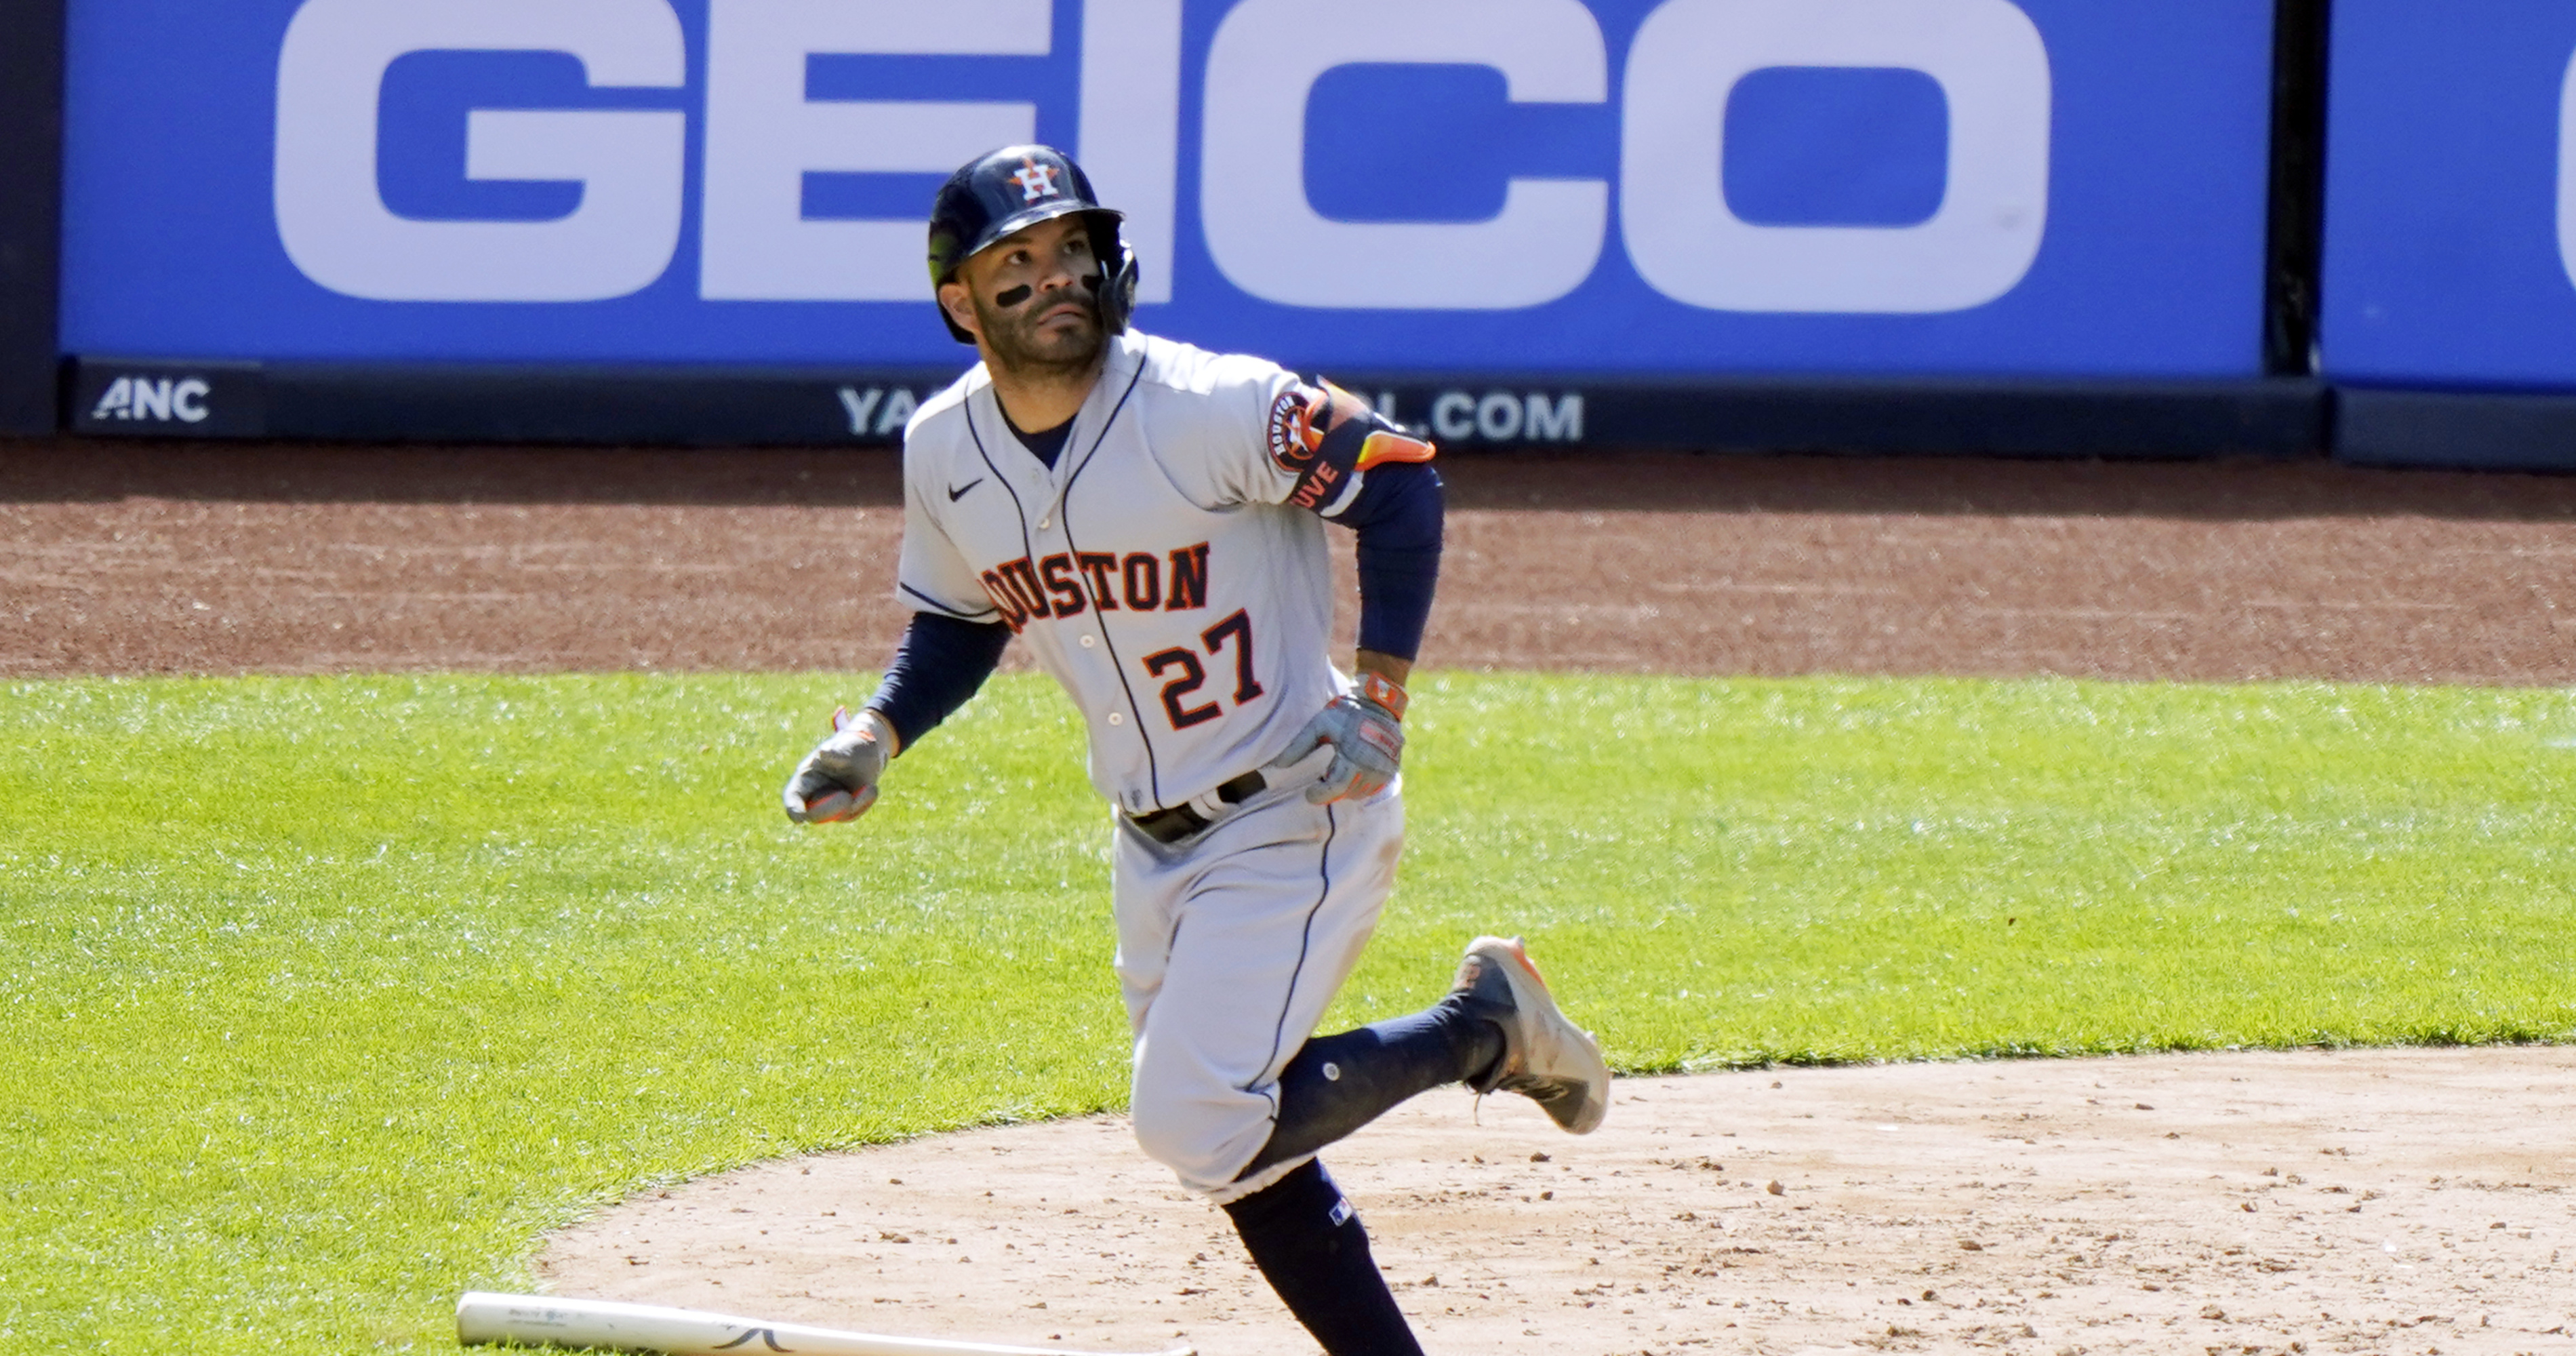 Yankees fans get NSFW chant going just for Jose Altuve (Video)